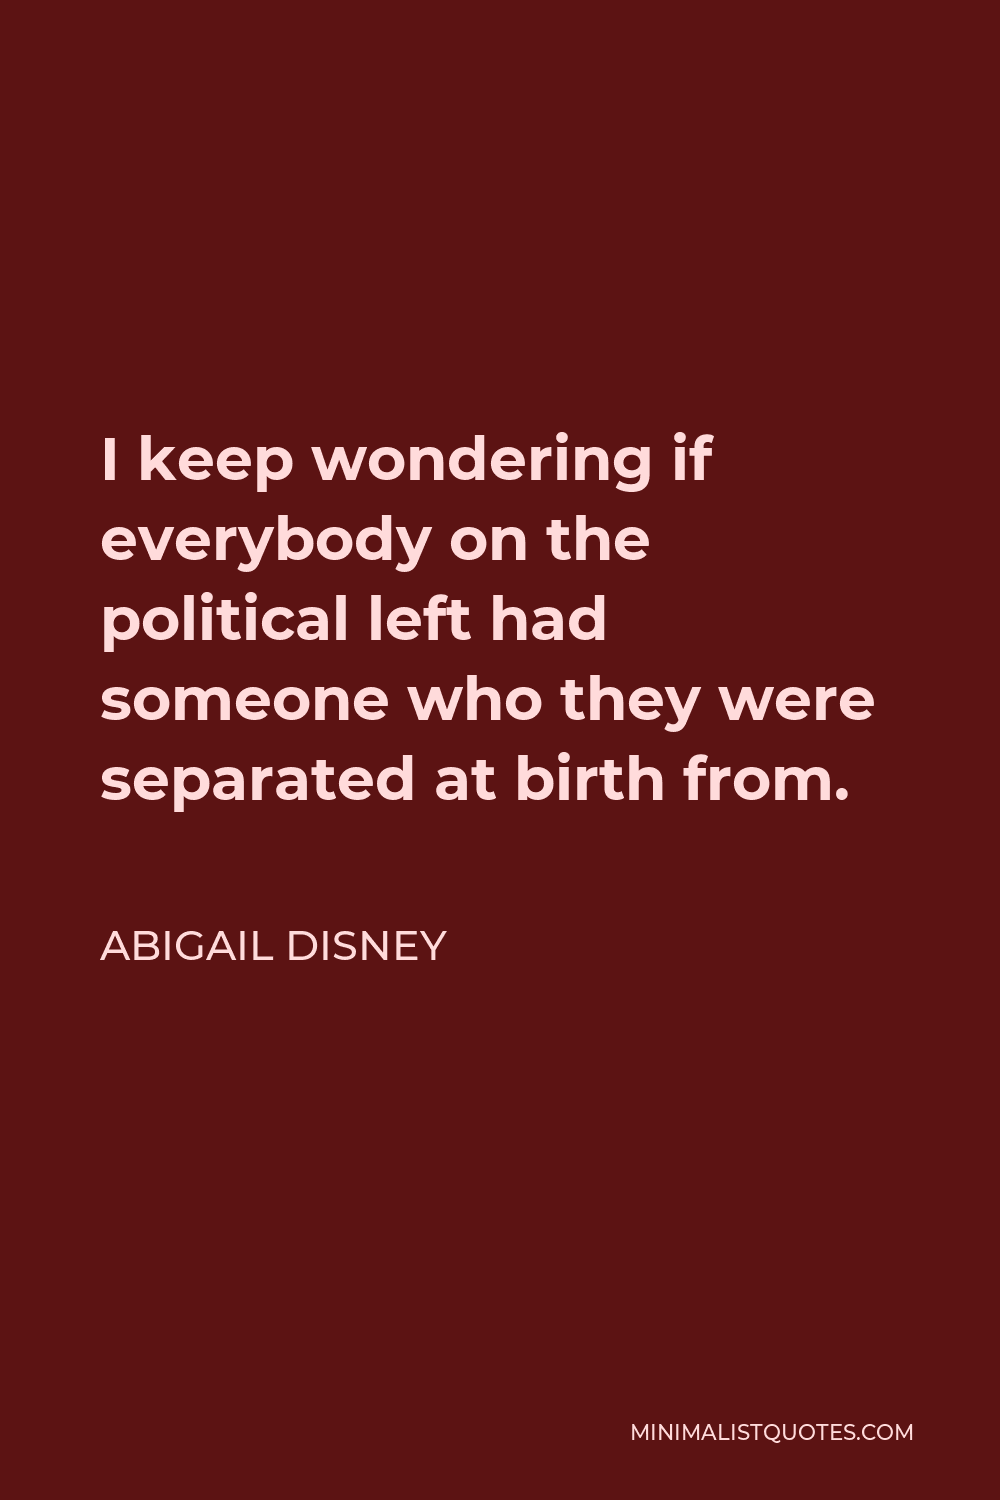 Abigail Disney Quote - I keep wondering if everybody on the political left had someone who they were separated at birth from.